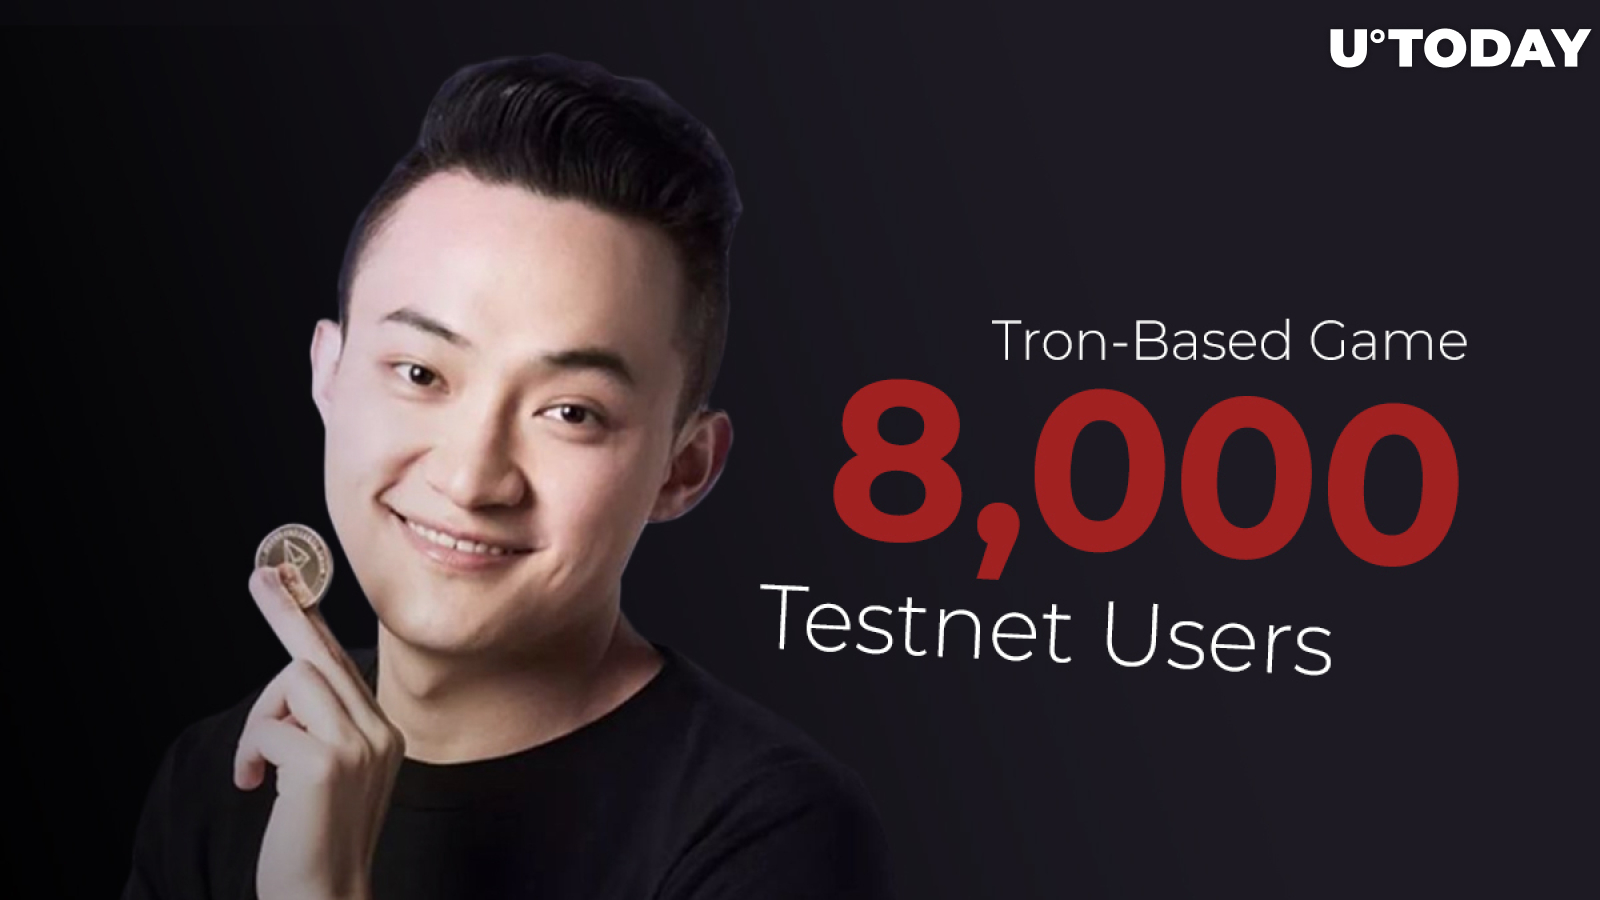 Justin Sun: New Tron-Based Game Gets 8,000 Testnet Users In One Hour